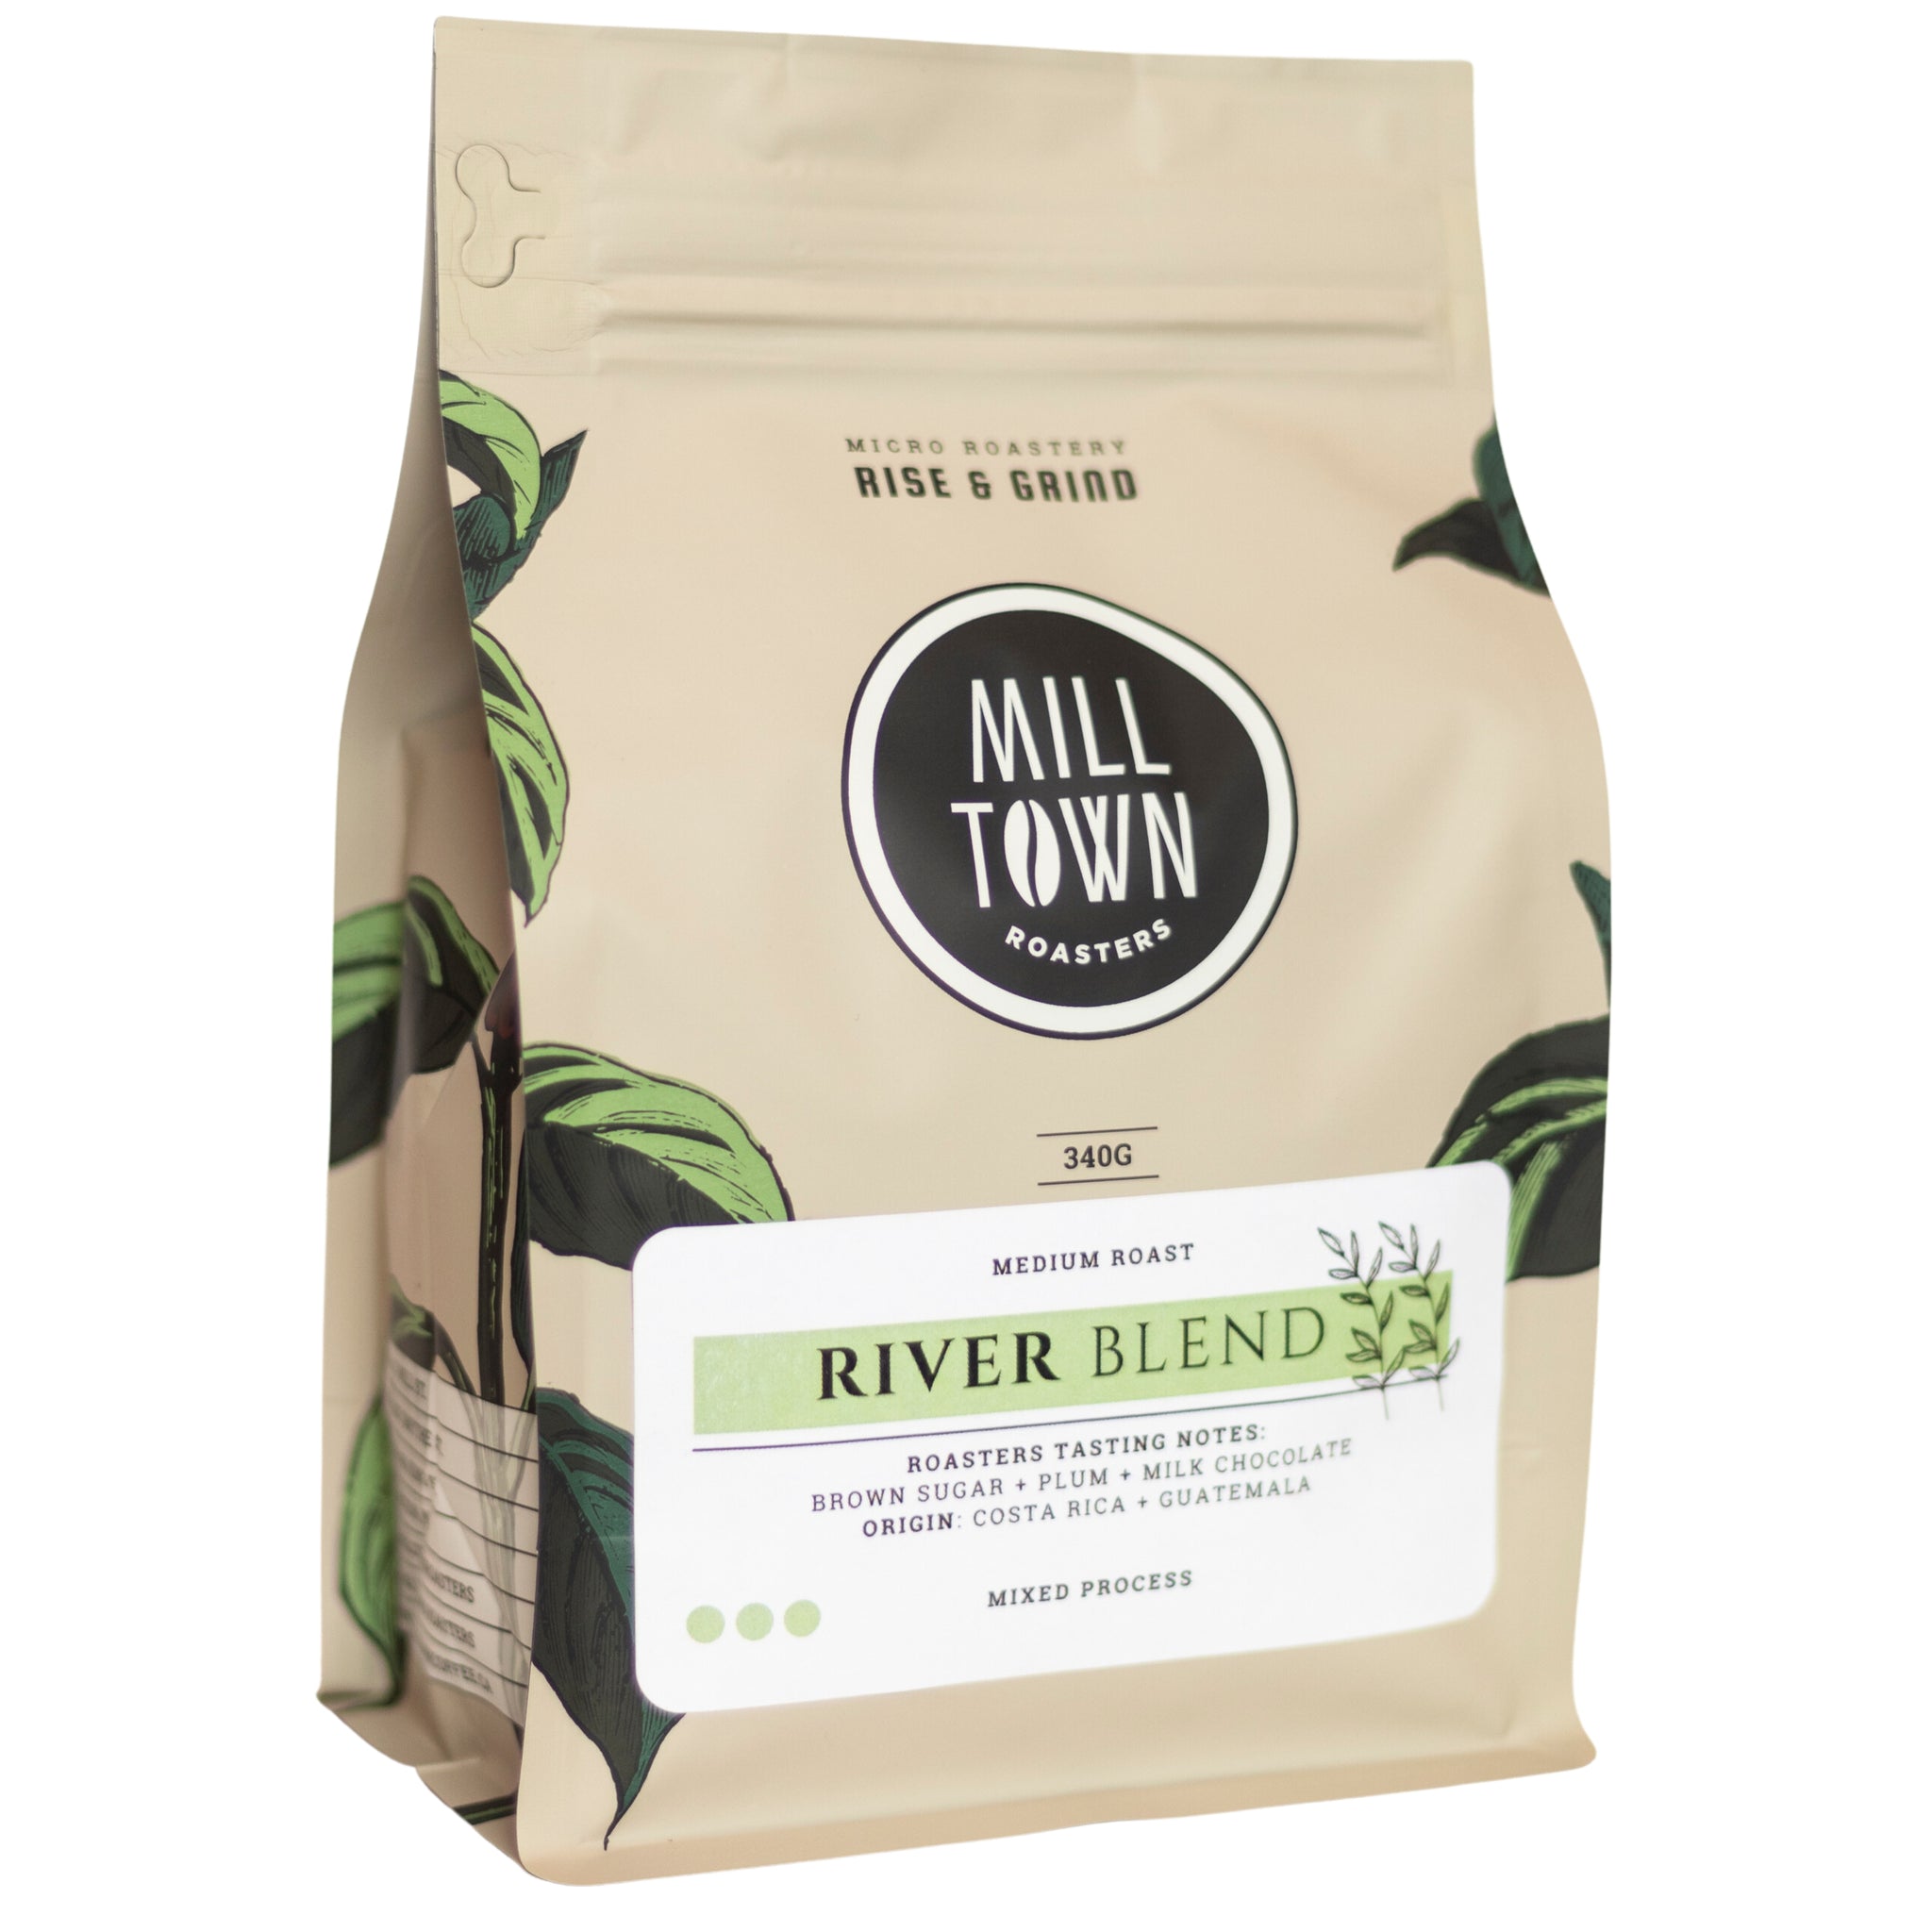 THE RIVER BLEND